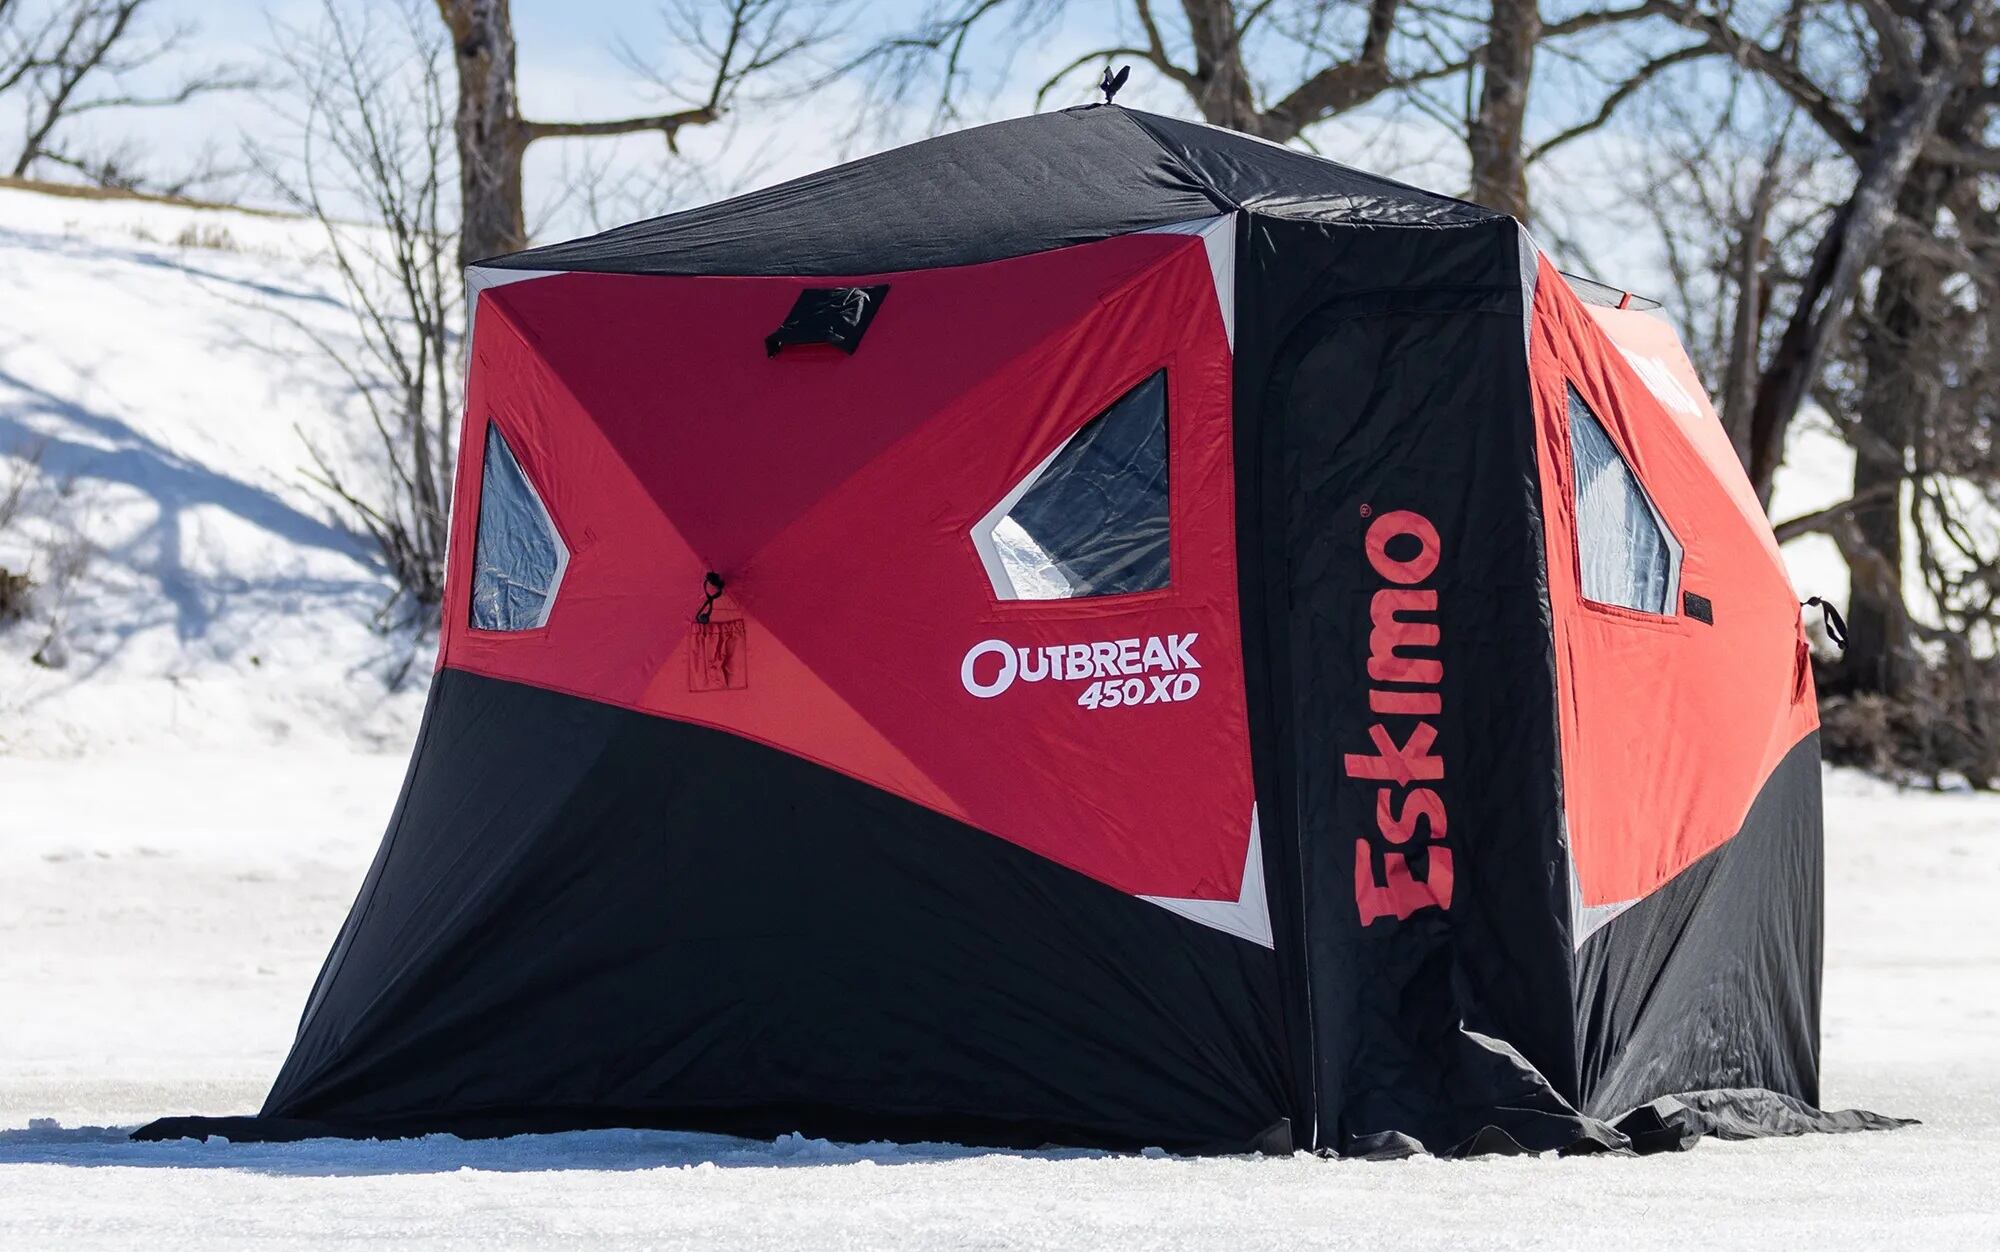 2-3Persons Ice Fishing Tent 3layers with Thick Cotton Inside Have